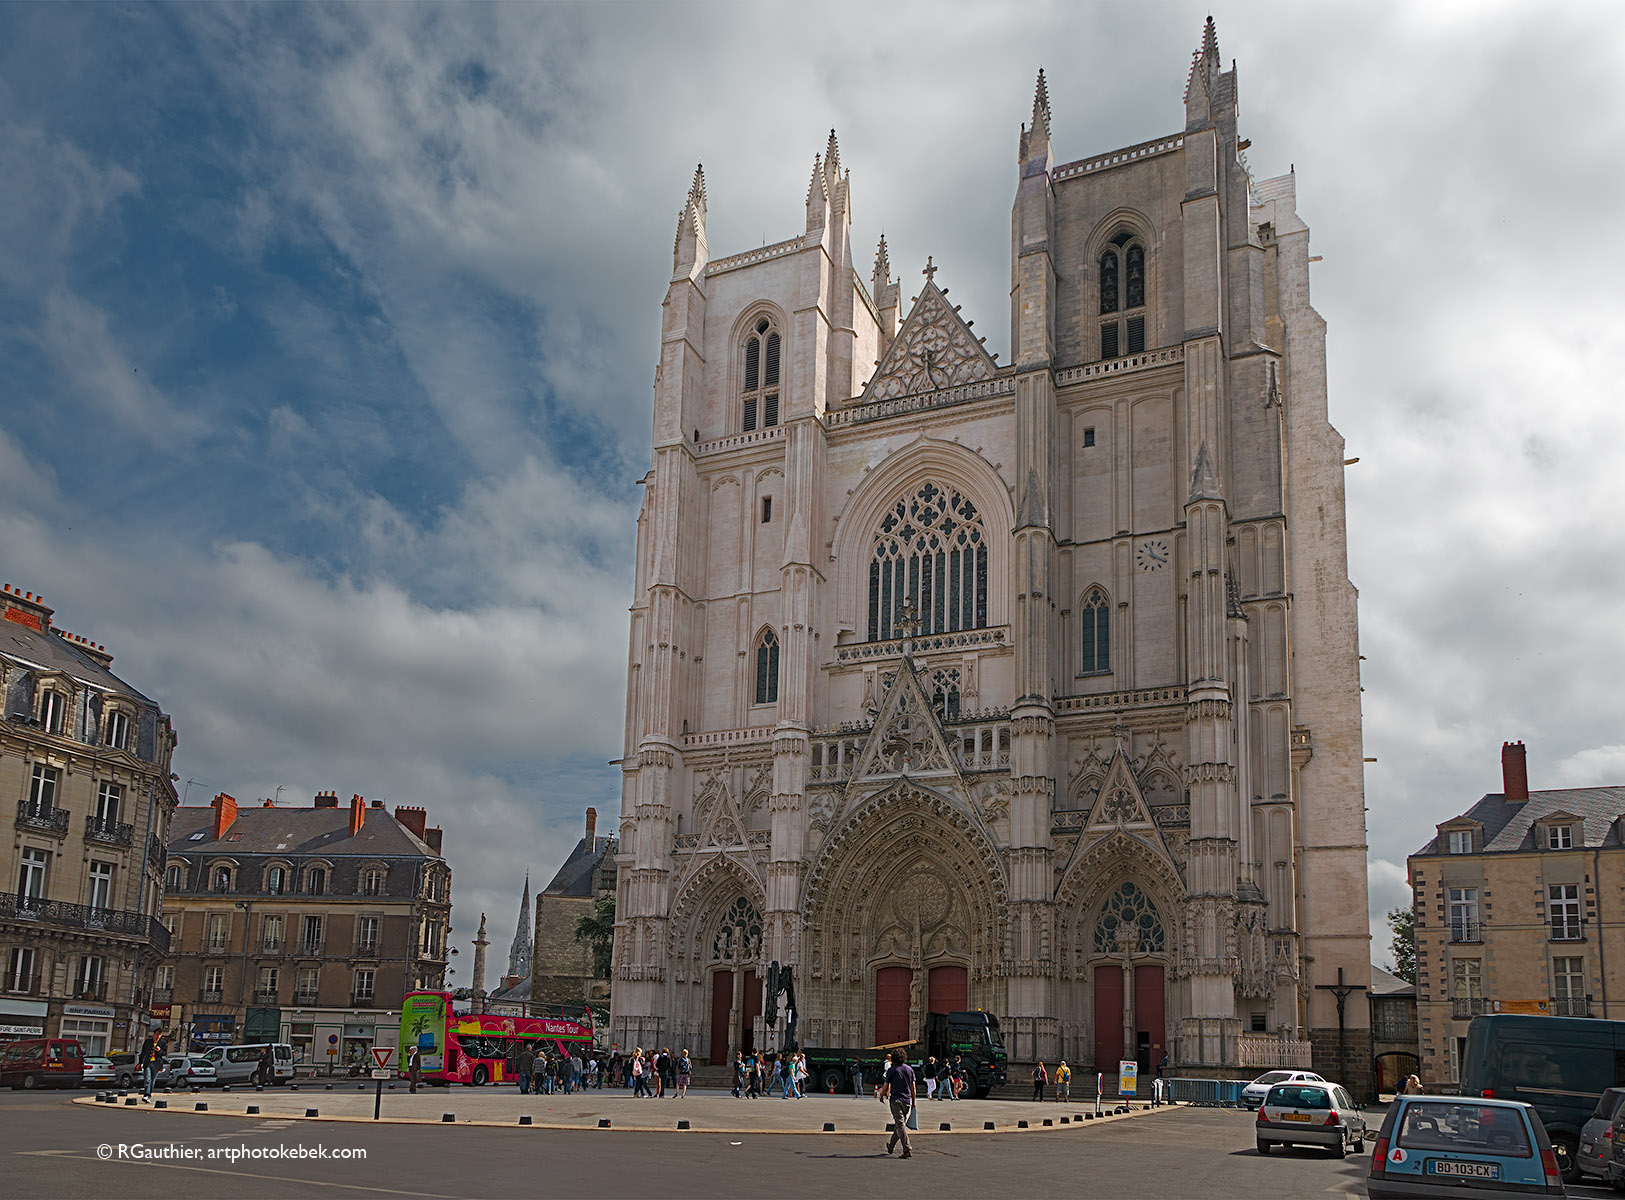 Cathedral in Nantes (Western France) vandalised with Nazi symbols ...